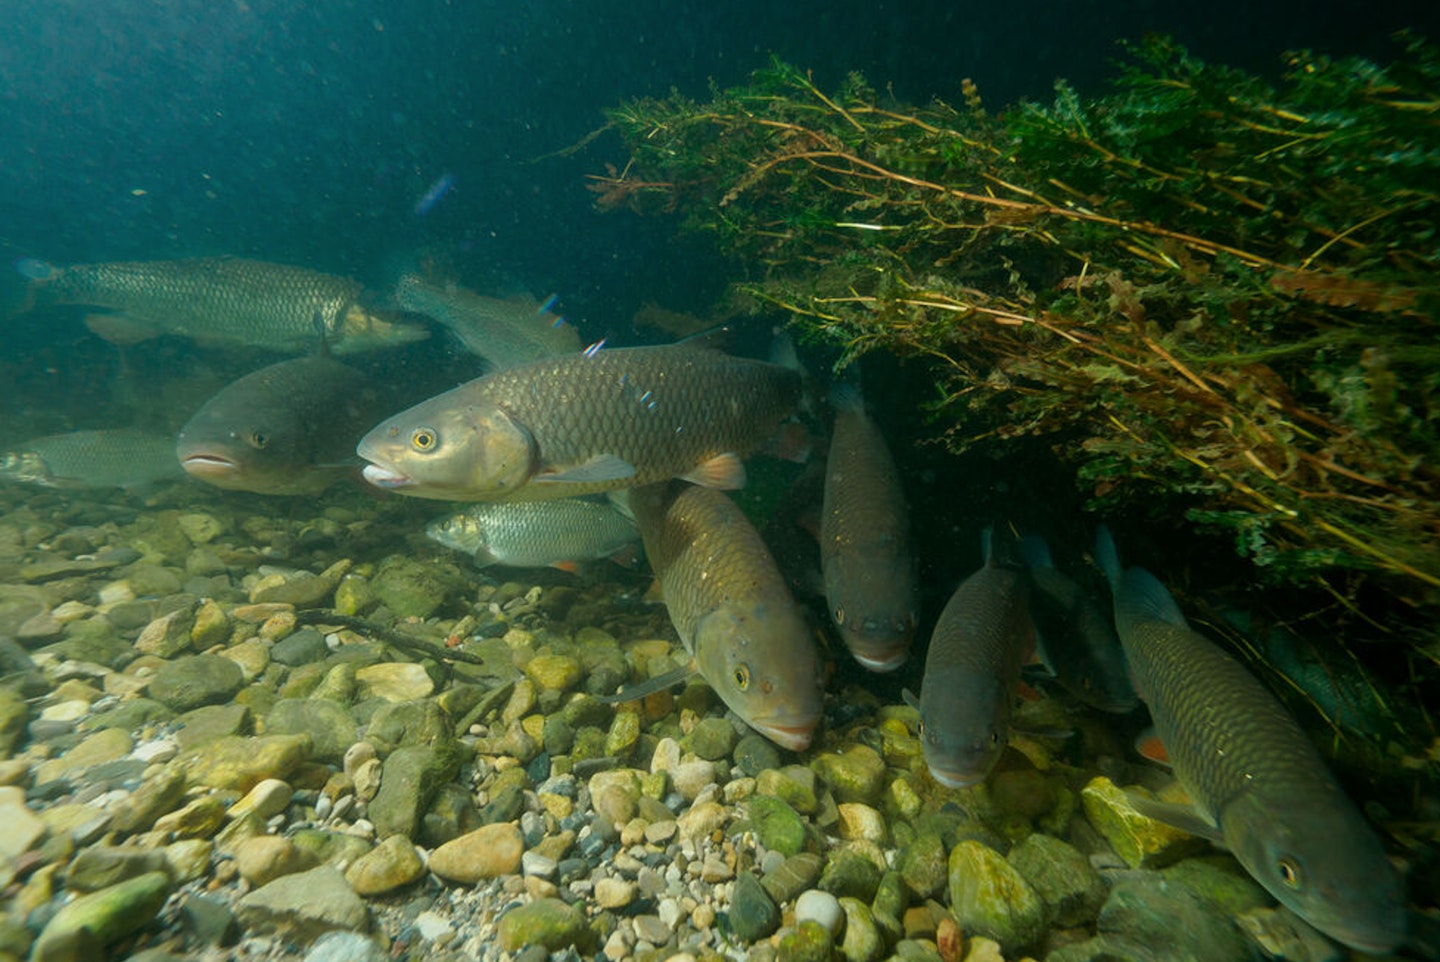 Perch, chub and pike are all likely to be positioned deep amid the branches